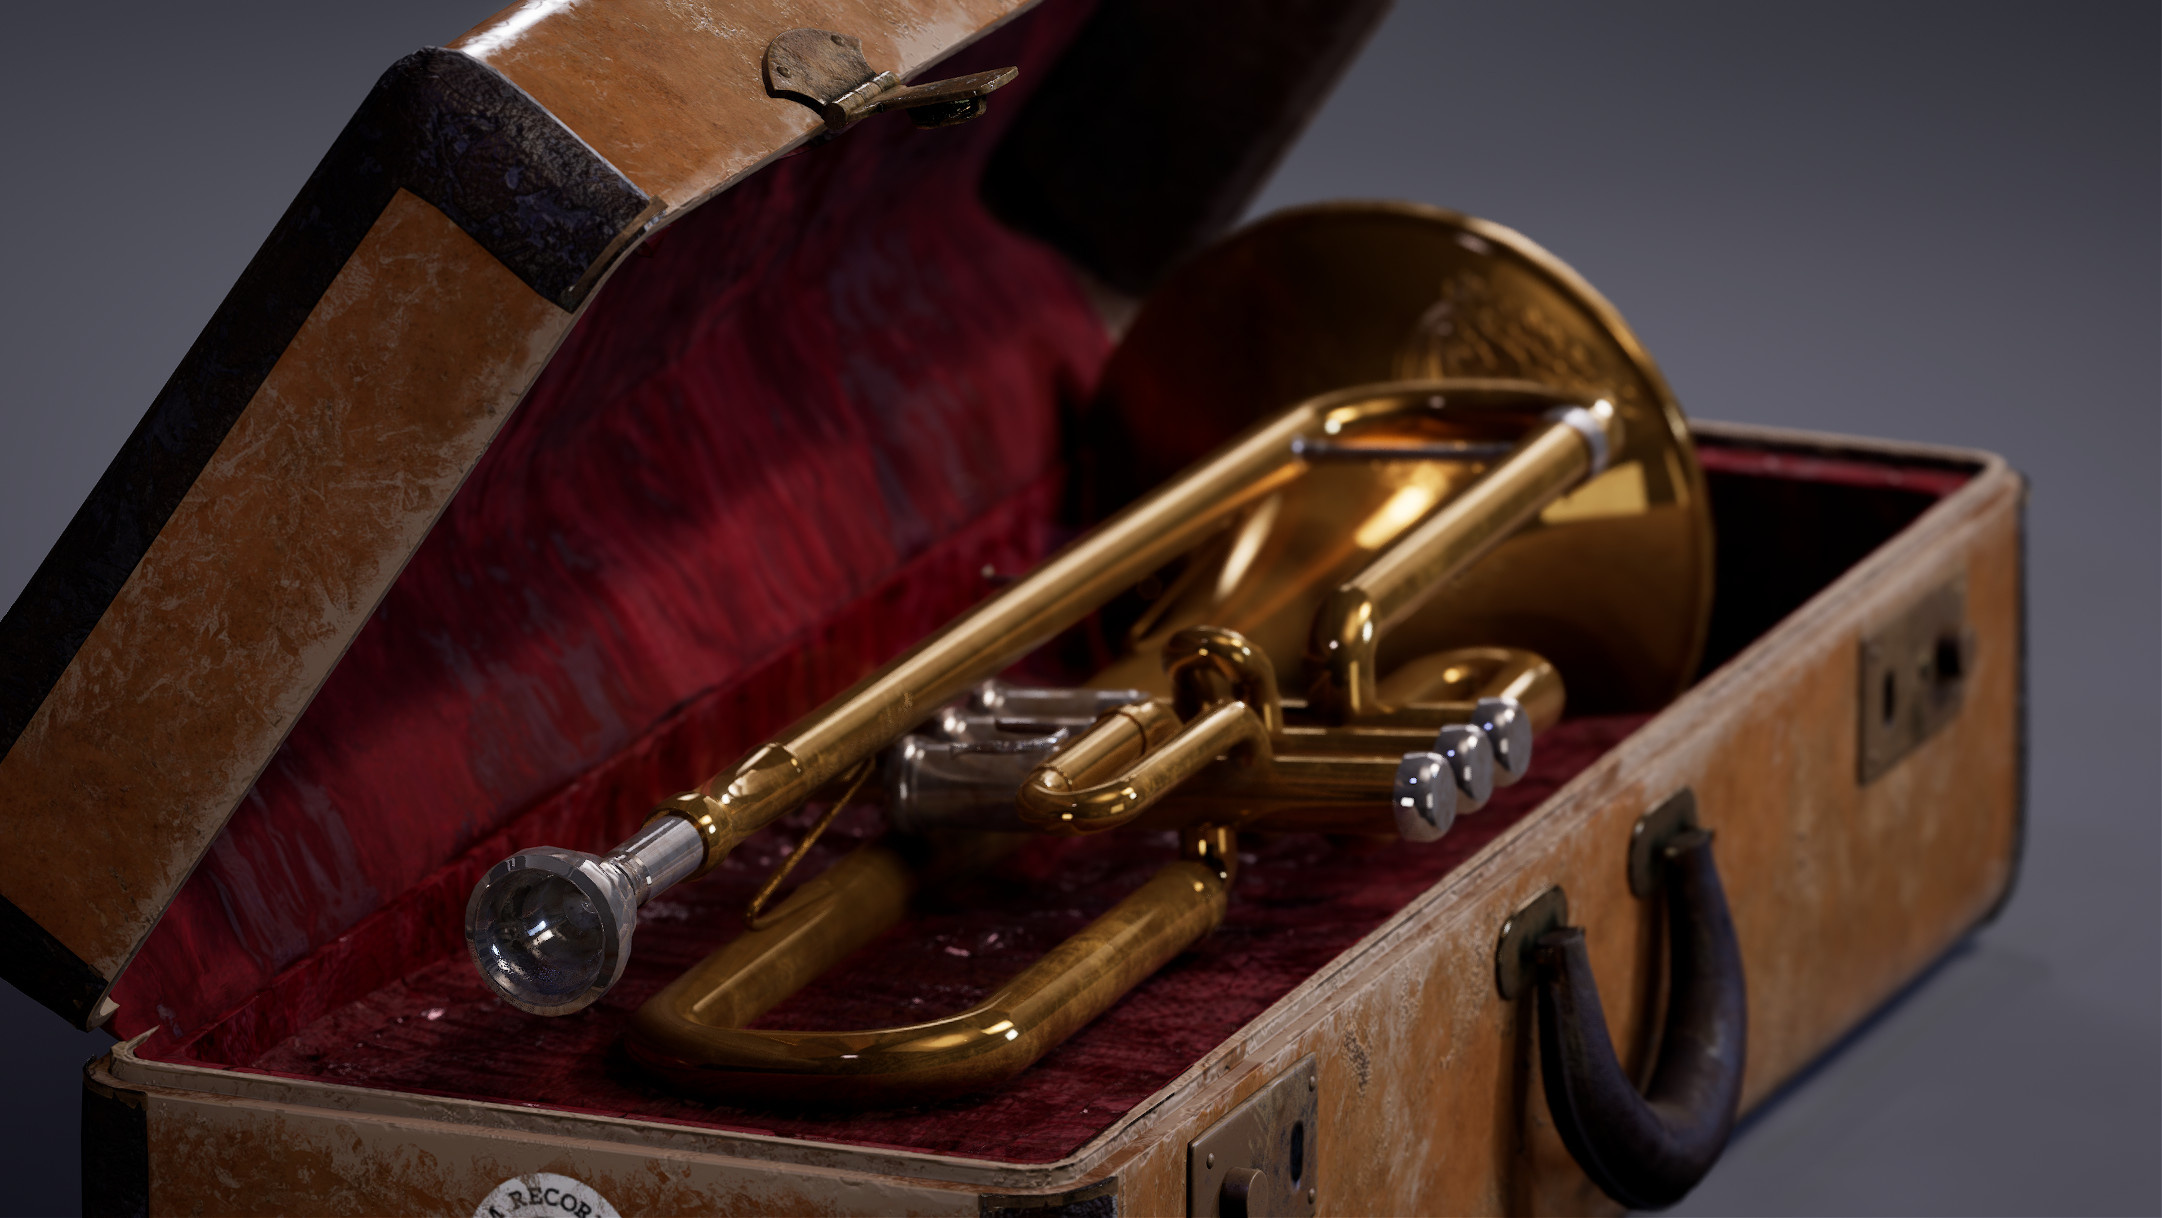 Trumpet: Valved aerophone sounded by lip movement, Constructed of brass tubing. 2170x1220 HD Background.